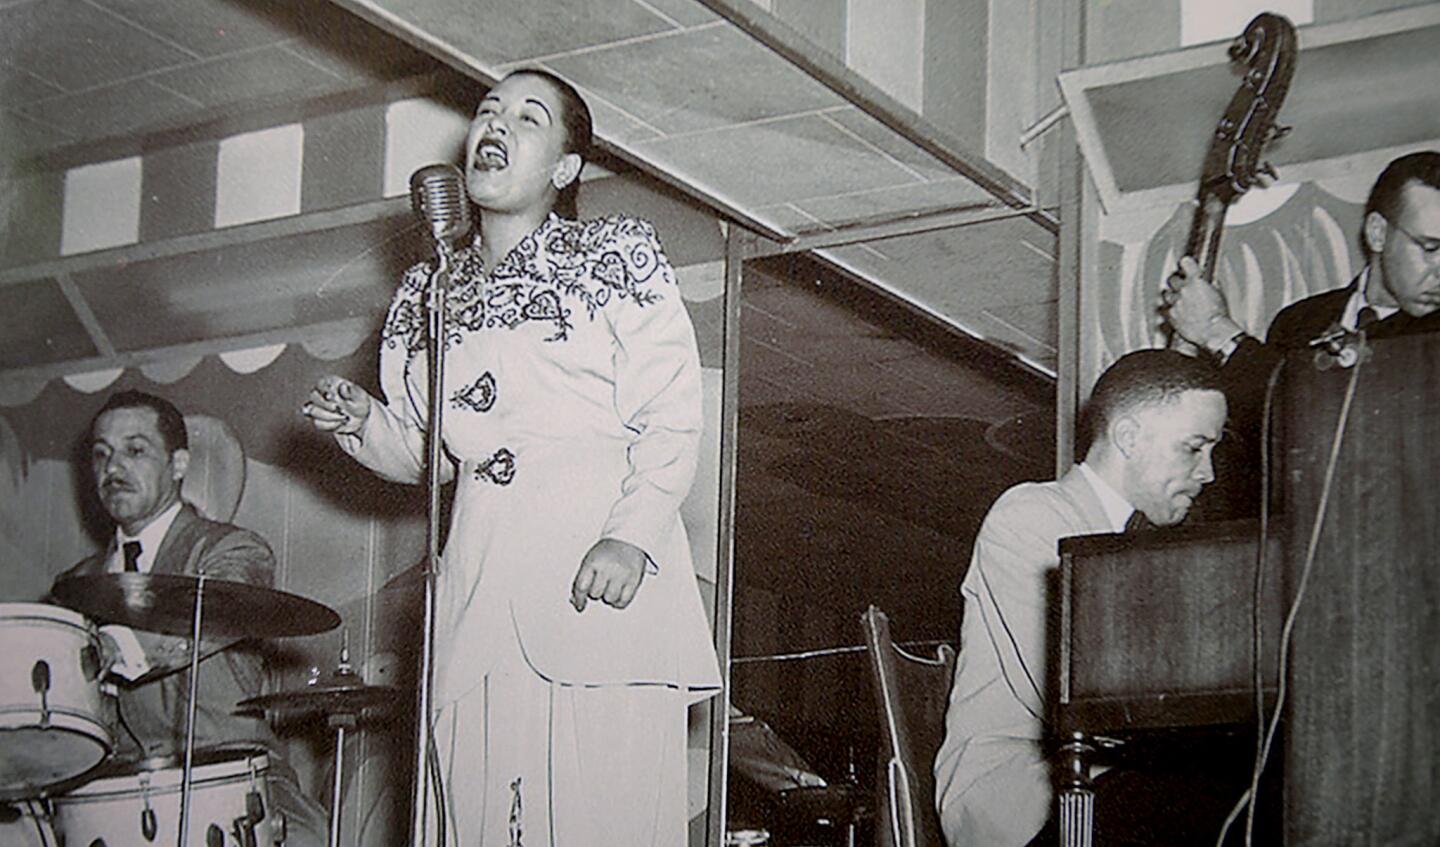 A photo hanging on a wall at the Dunbar Hotel shows jazz singer Billie Holiday performing at the hotel in the 1940s.